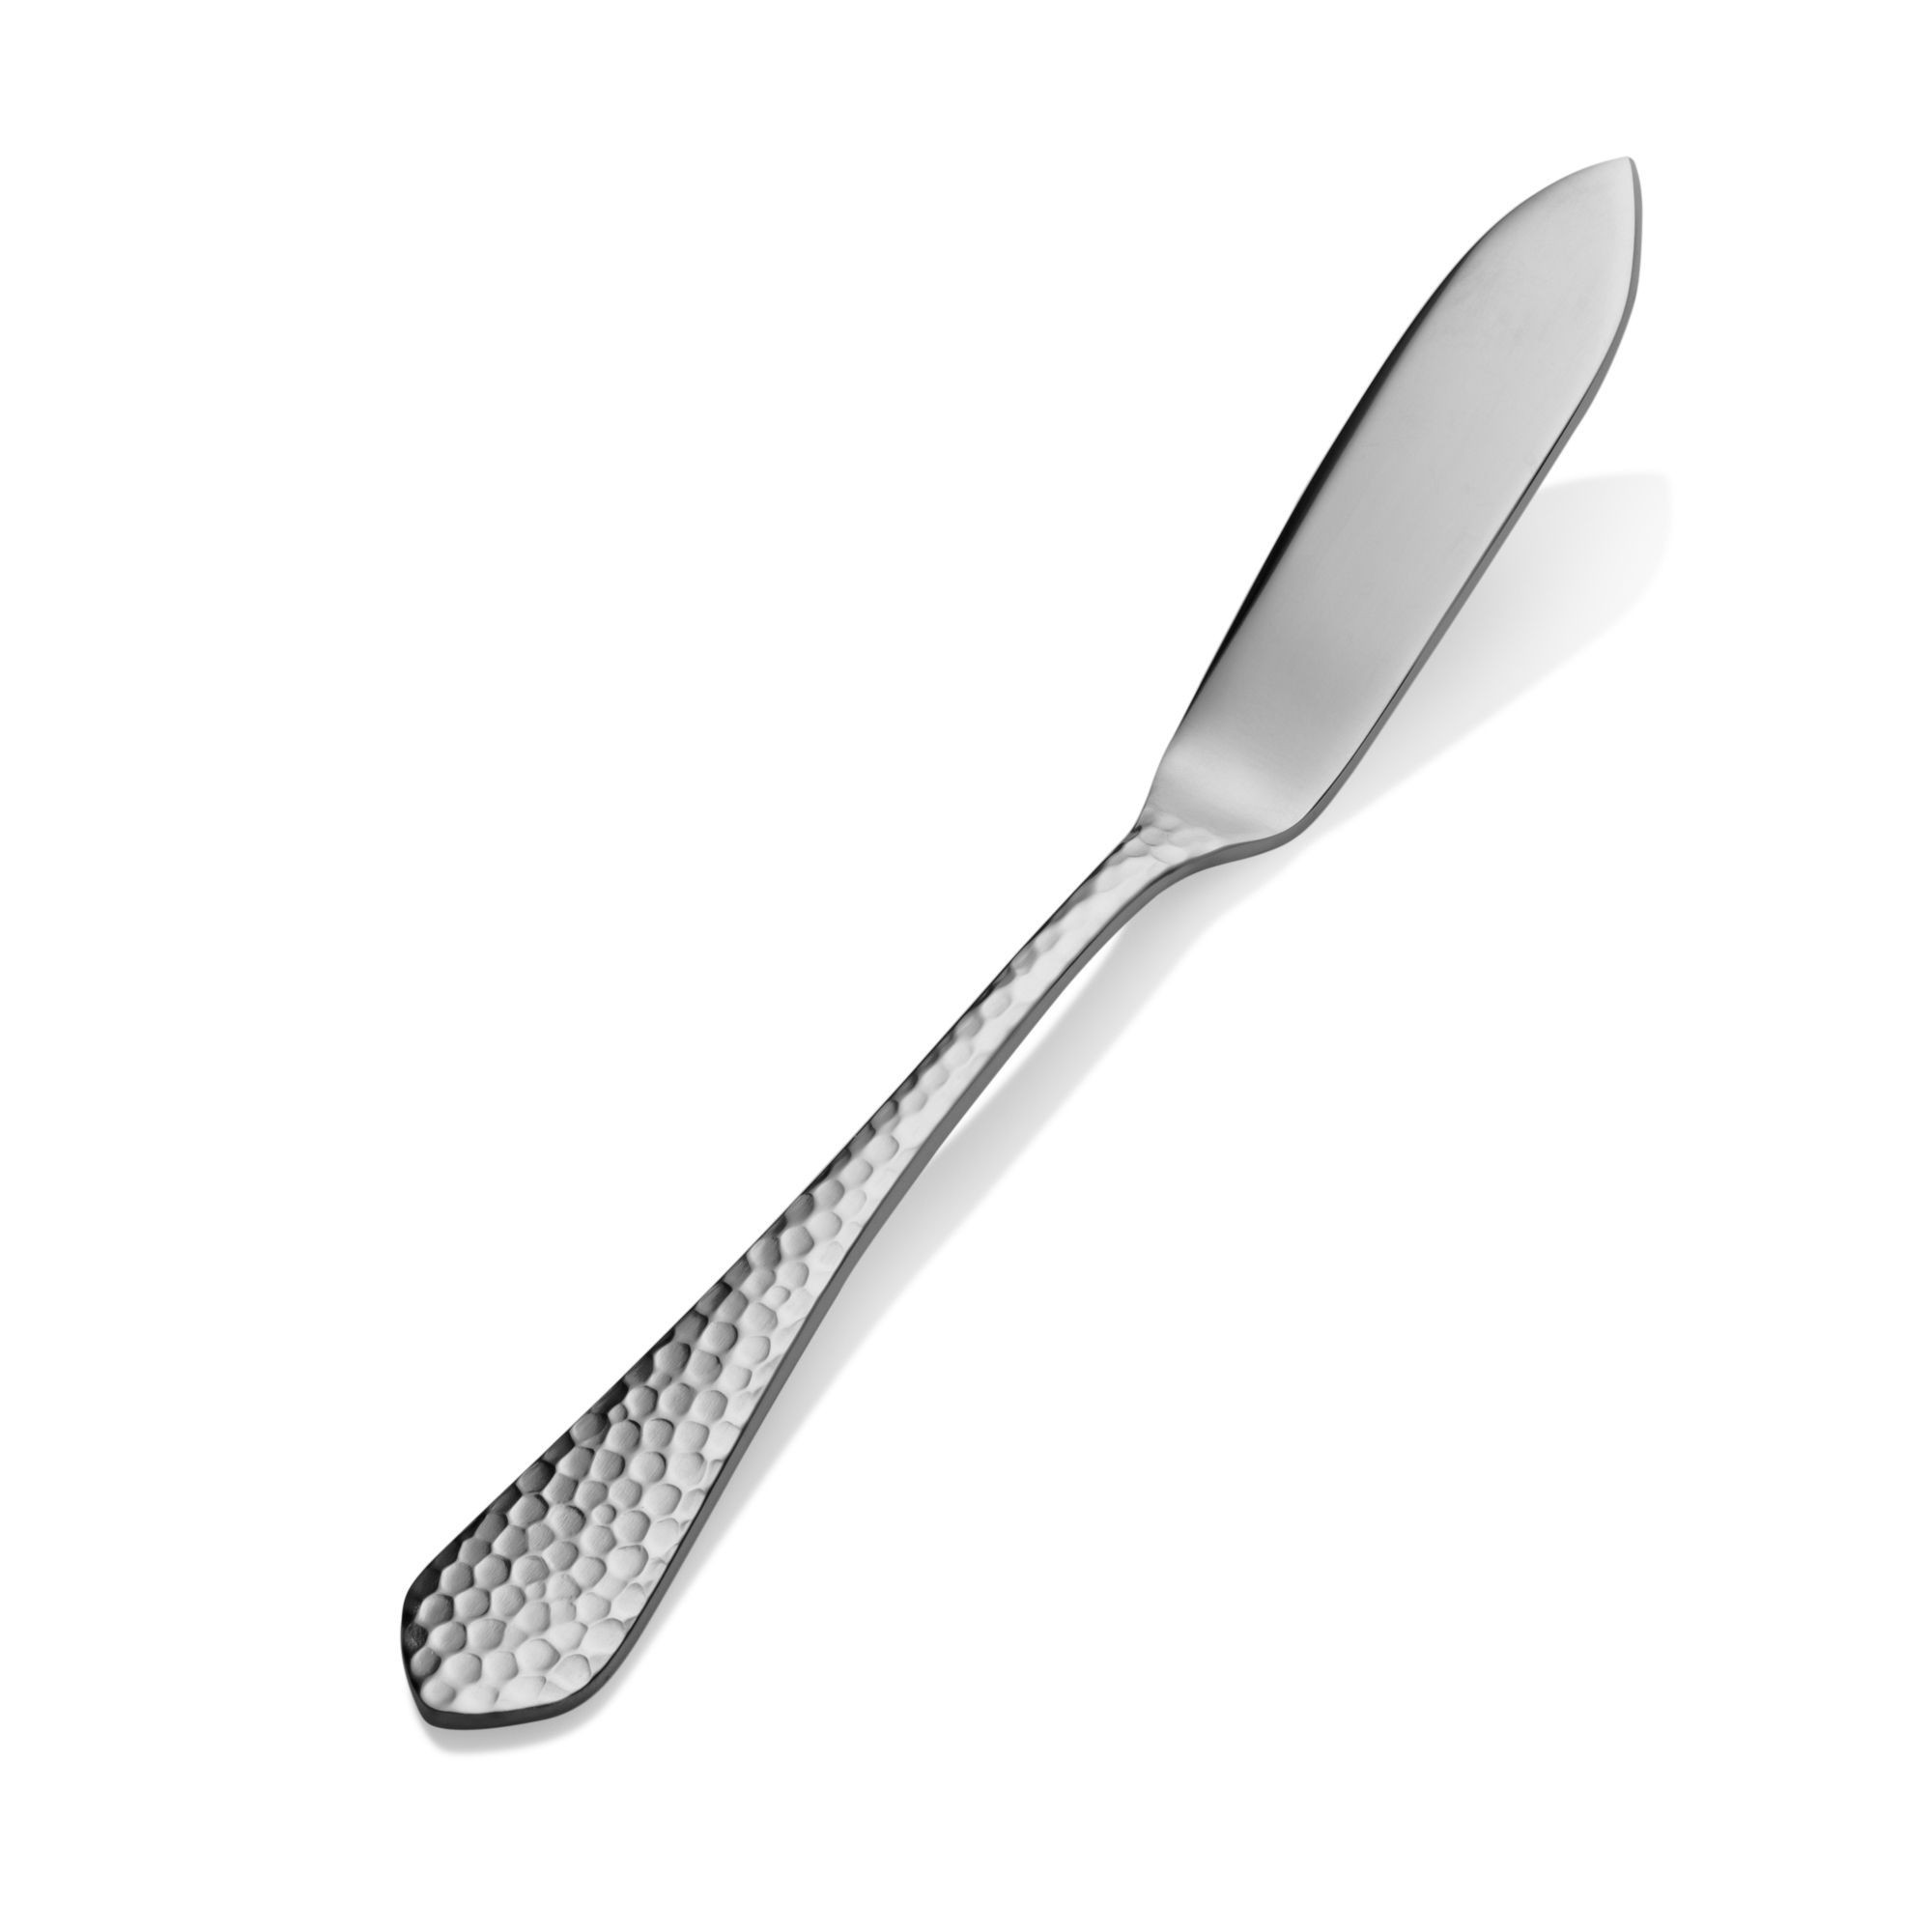 Bon Chef SBS1213S Reflections Bonsteel Silverplated Flat Handle Butter Spreader